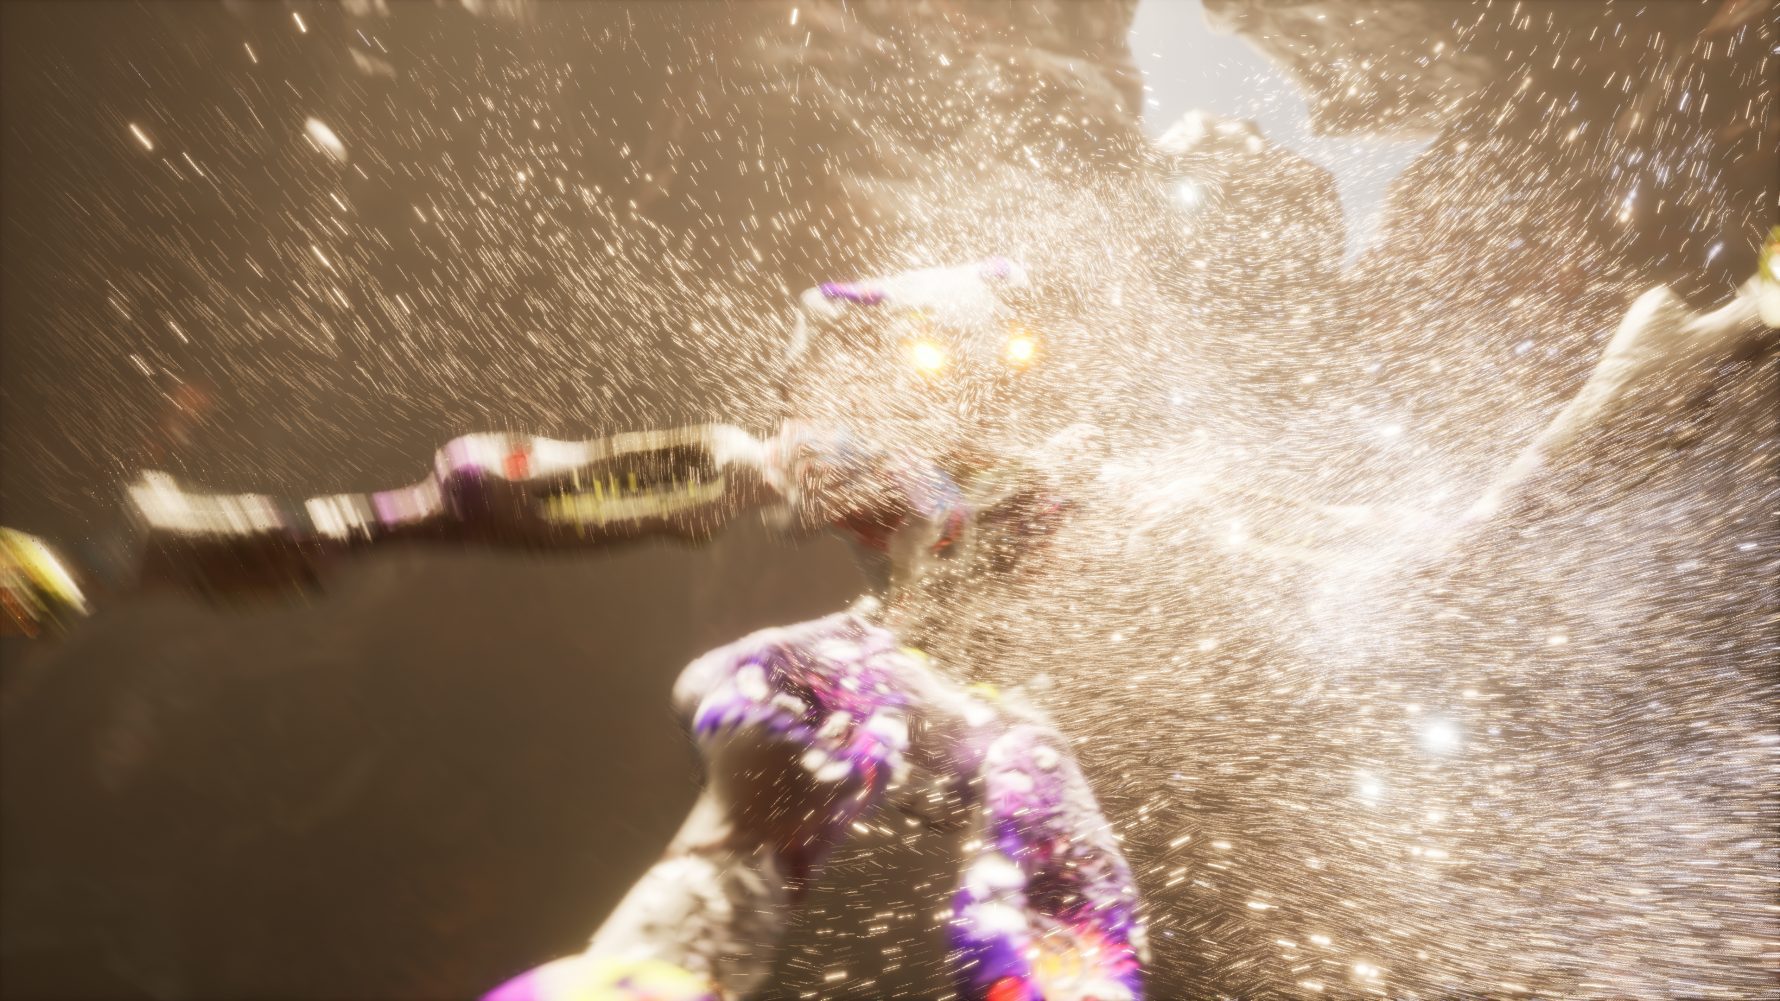 A game avatar seen from the side explodes in a burst of white light